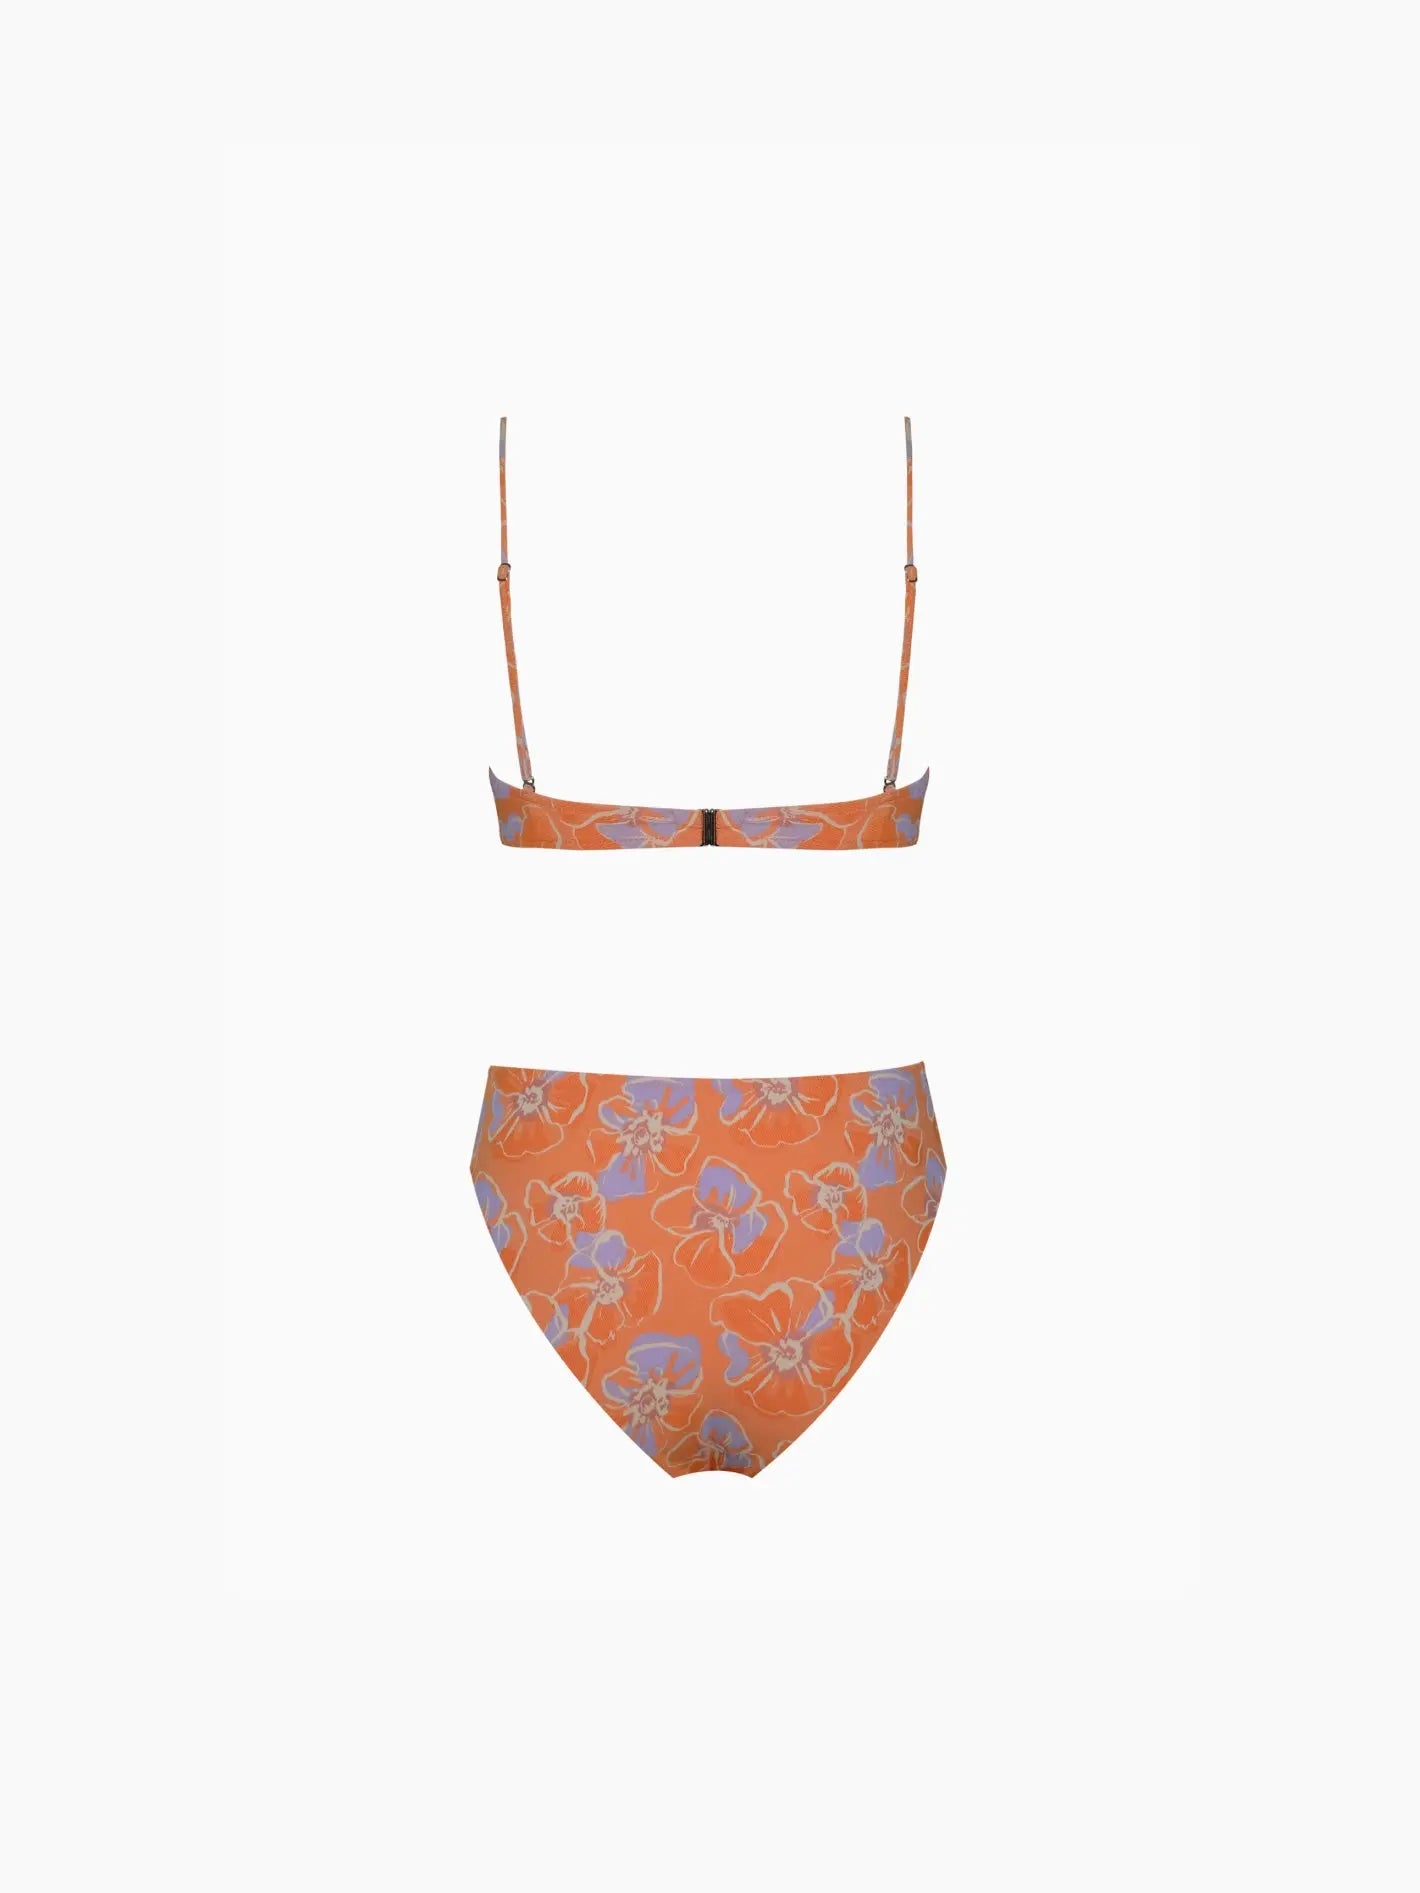 Cleo Bikini Mandarina by Pale, available at Bassalstore. The top features thin adjustable straps, and the bottom boasts a fashionable high-waisted cut.